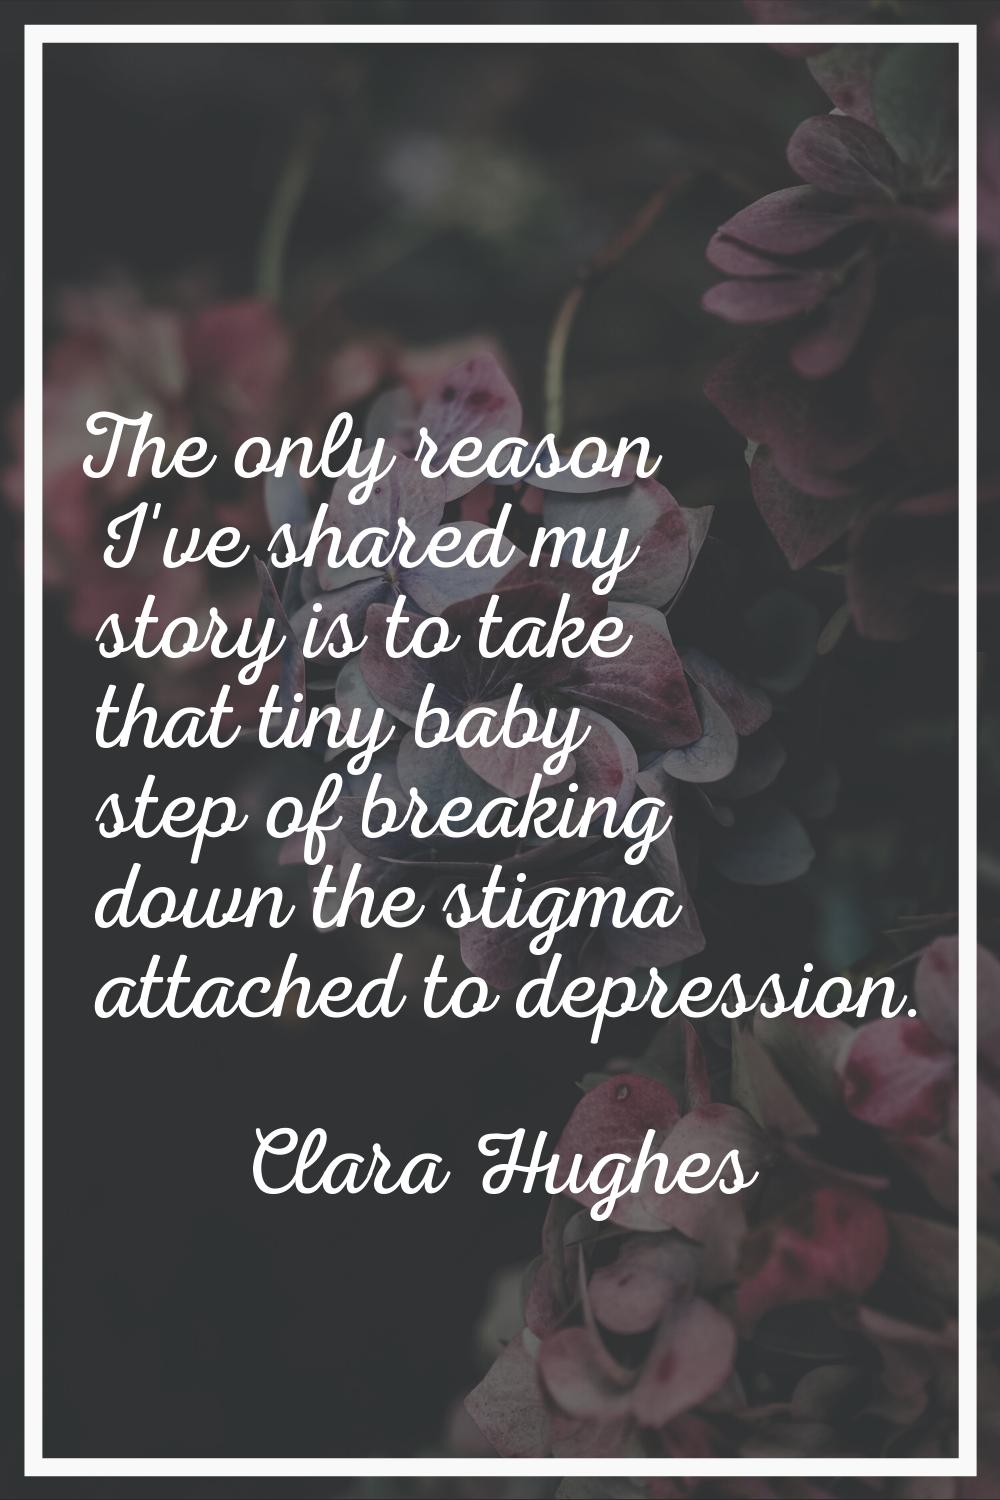 The only reason I've shared my story is to take that tiny baby step of breaking down the stigma att